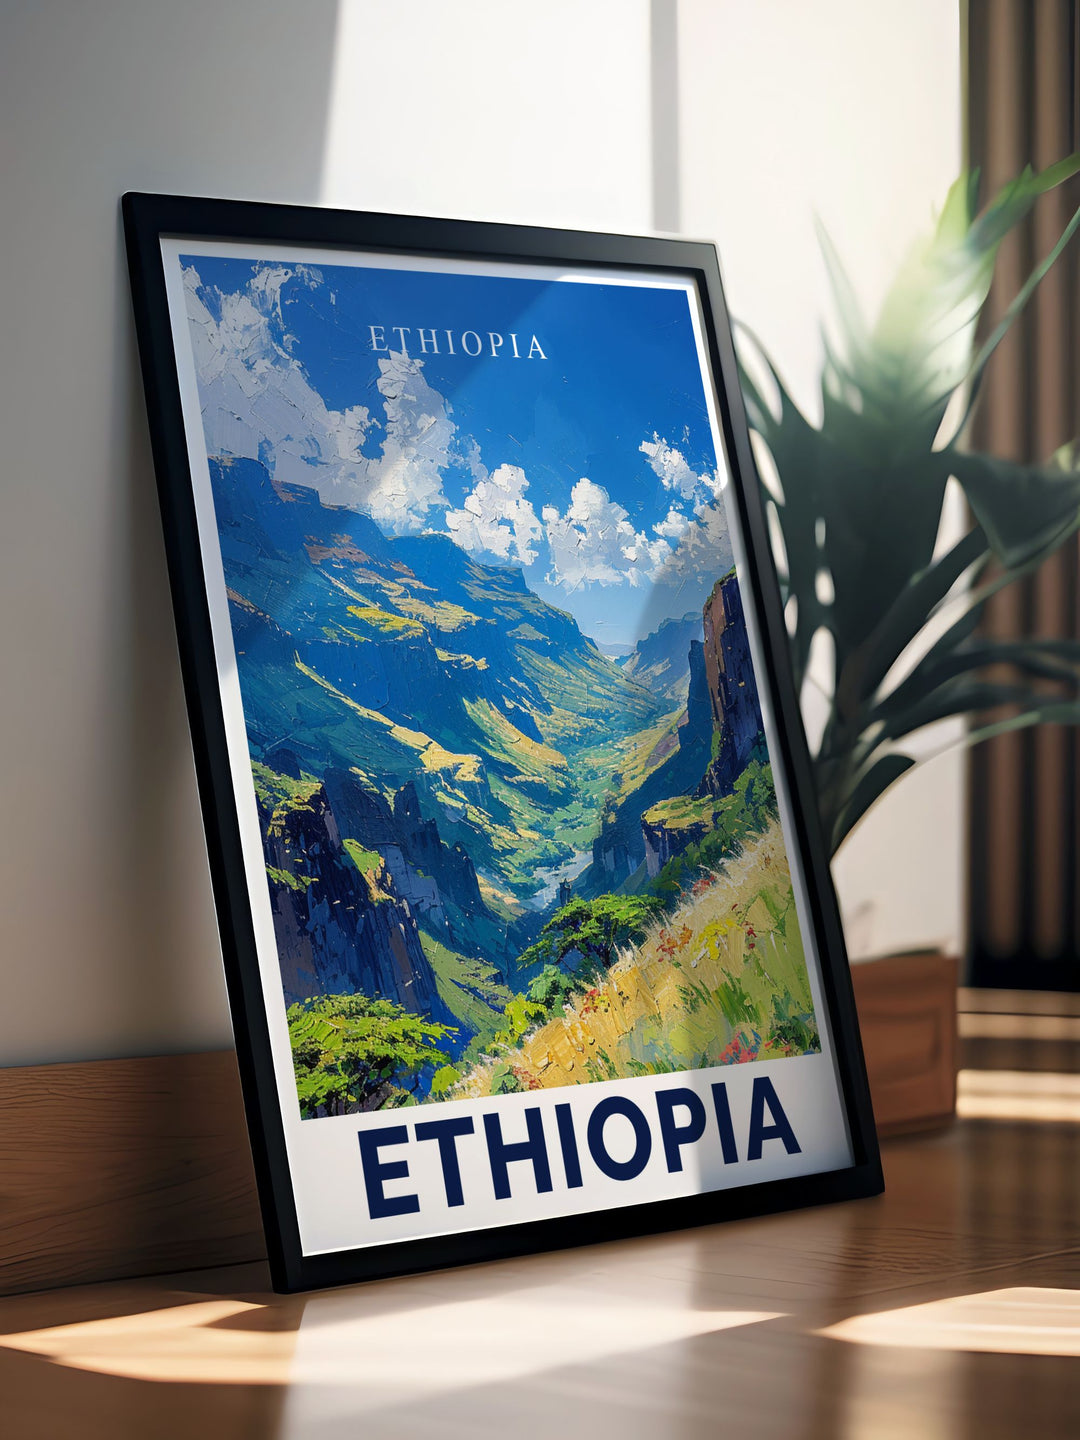 Colorful Ethiopia Decor featuring the Simien Mountains with detailed craftsmanship and vivid imagery adding natural charm and elegance to your living space office or bedroom